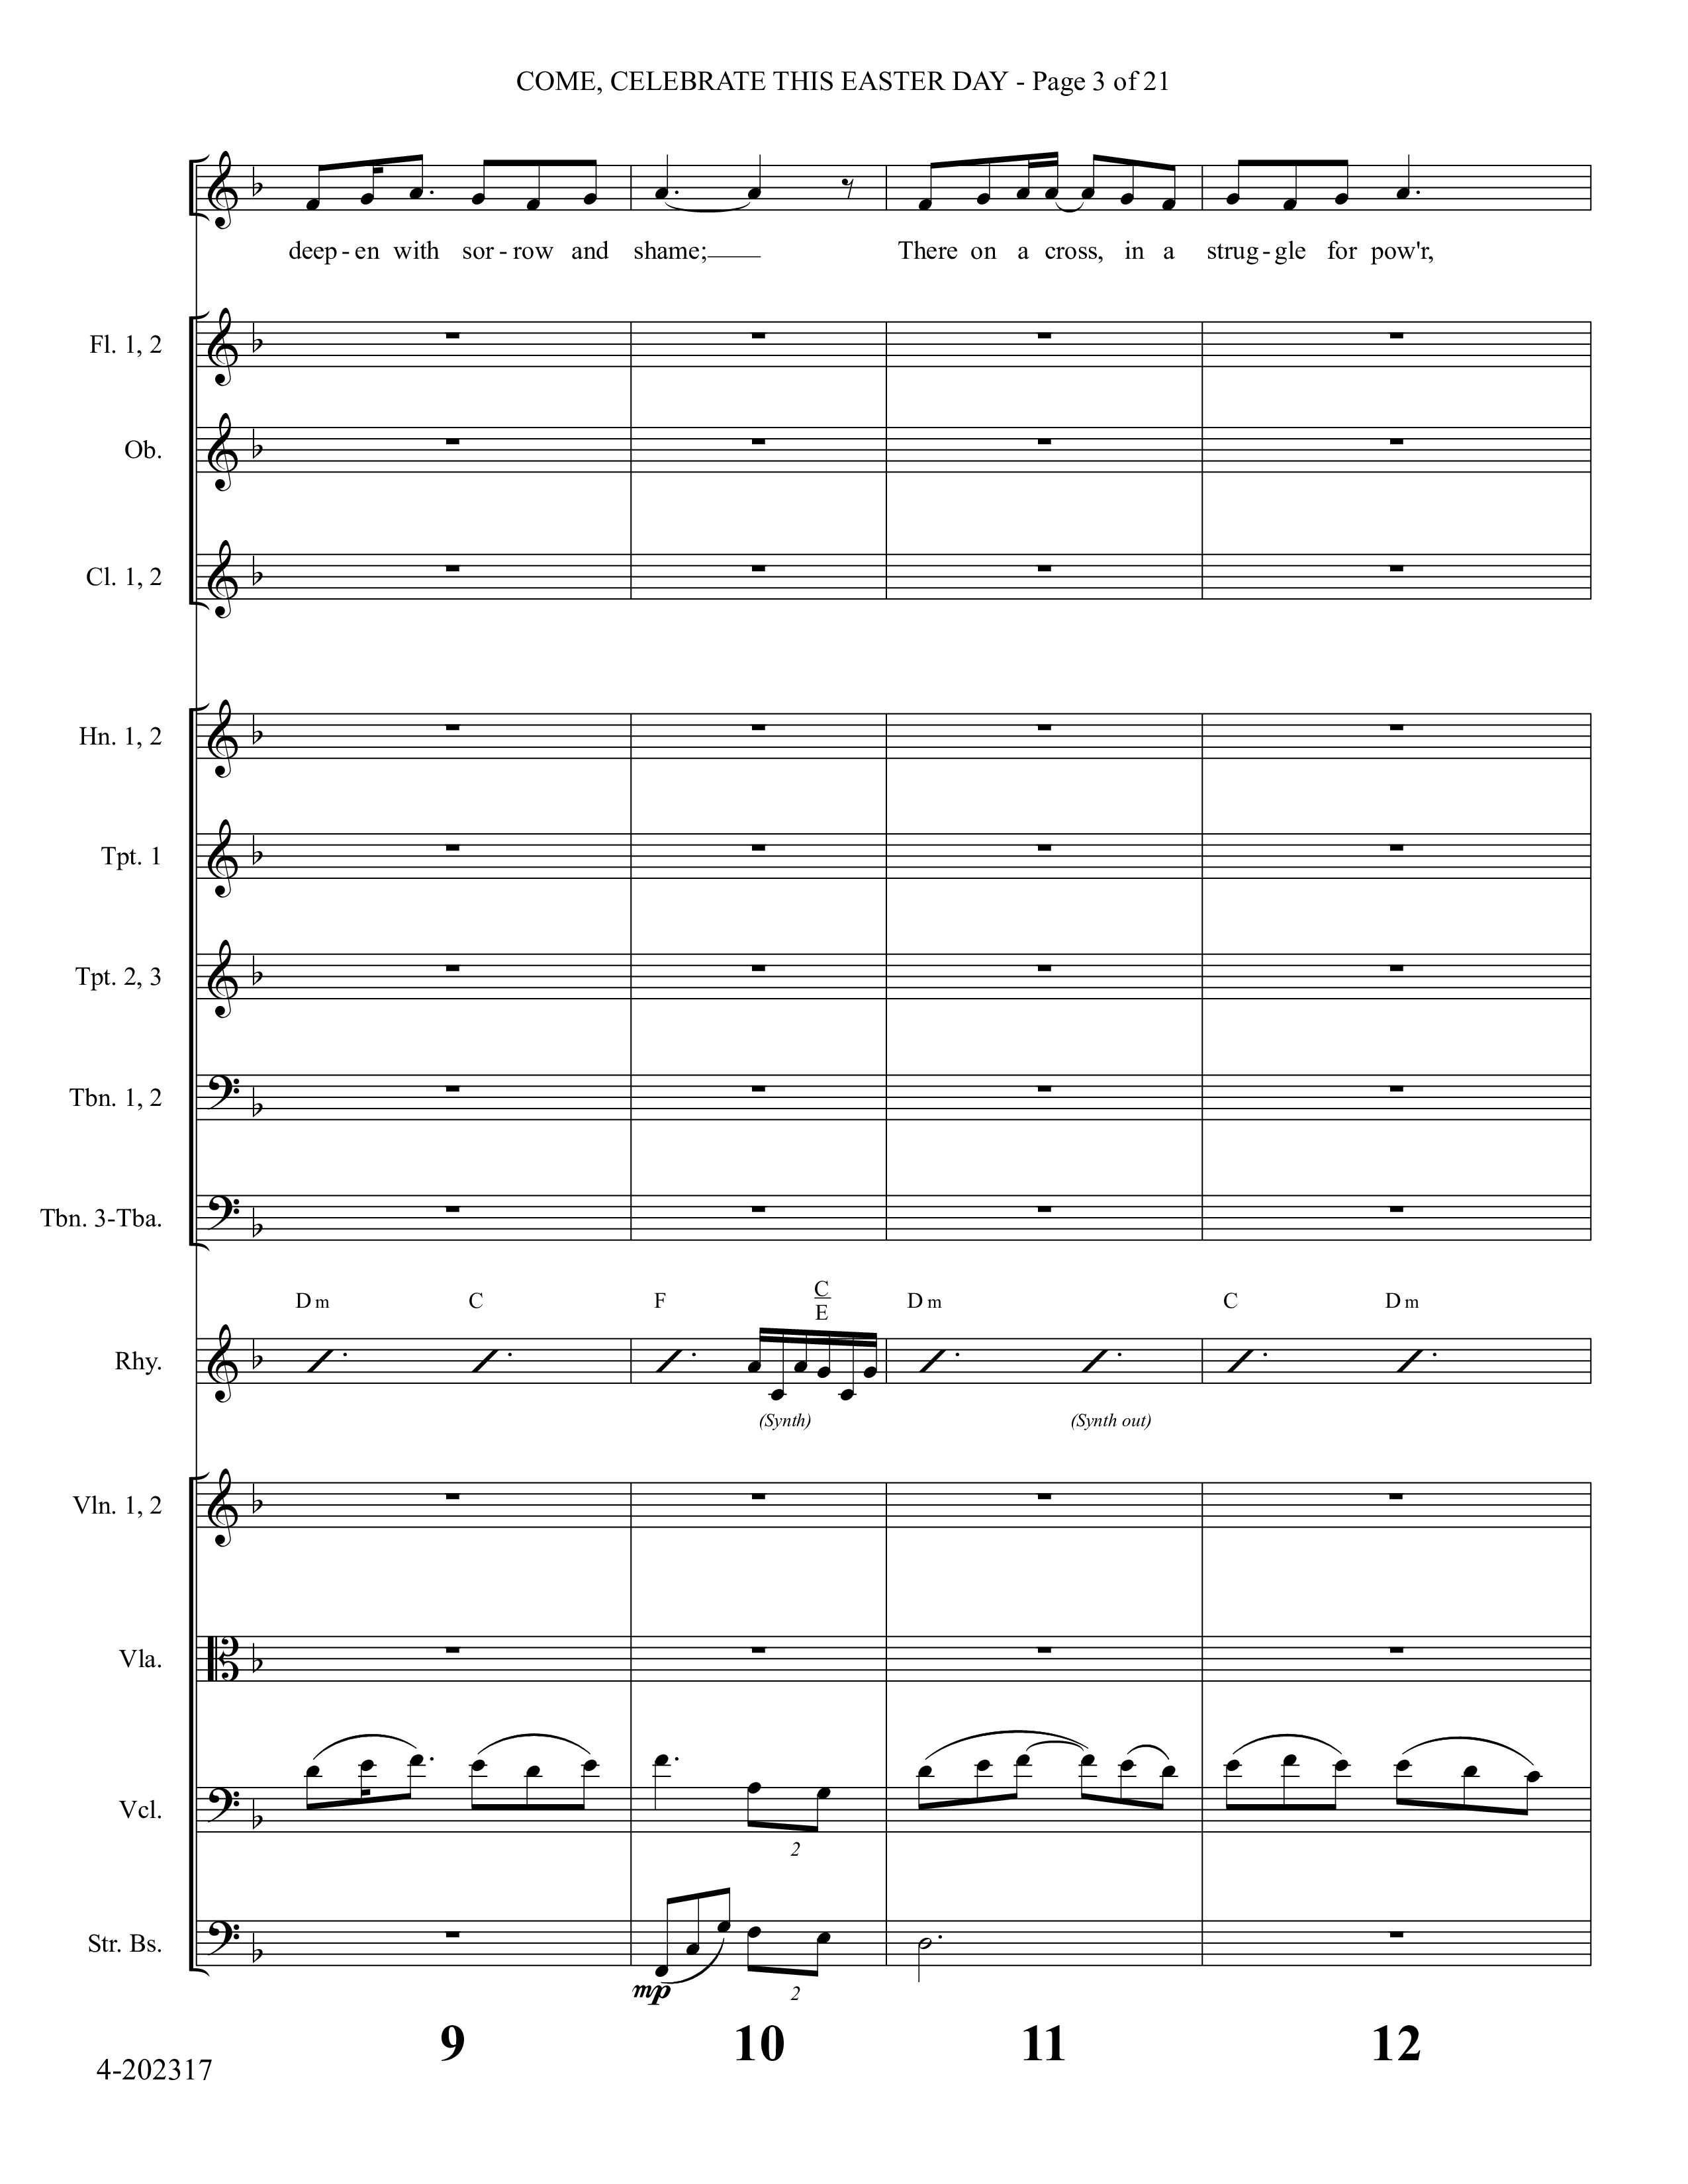 Come Celebrate This Easter Day (Choral Anthem SATB) Conductor's Score (Foster Music Group / Arr. Marty Parks)